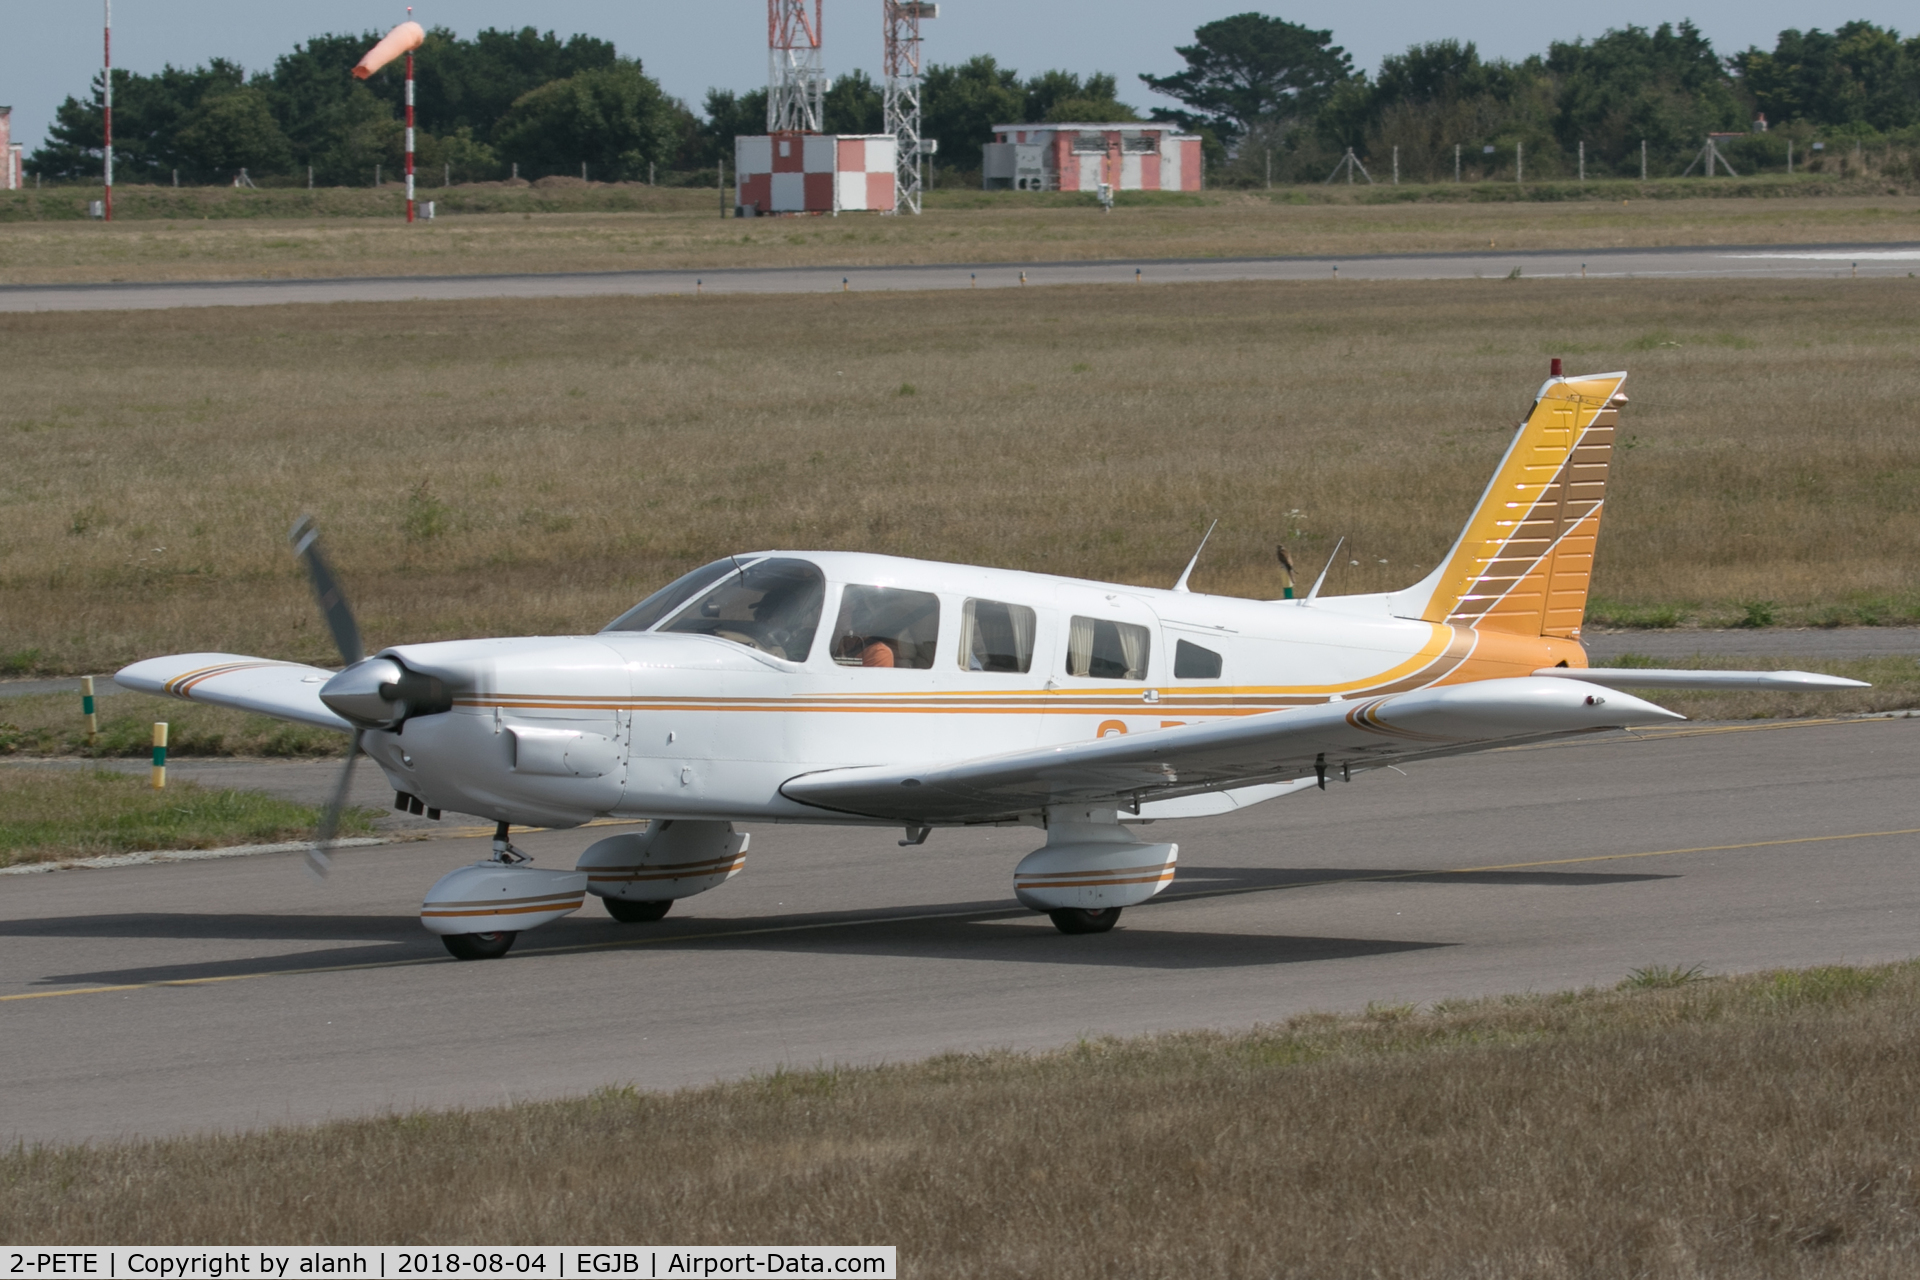 2-PETE, Piper PA-32-300 Cherokee Six C/N 32-7940242, Taxiing for departure at Guernsey